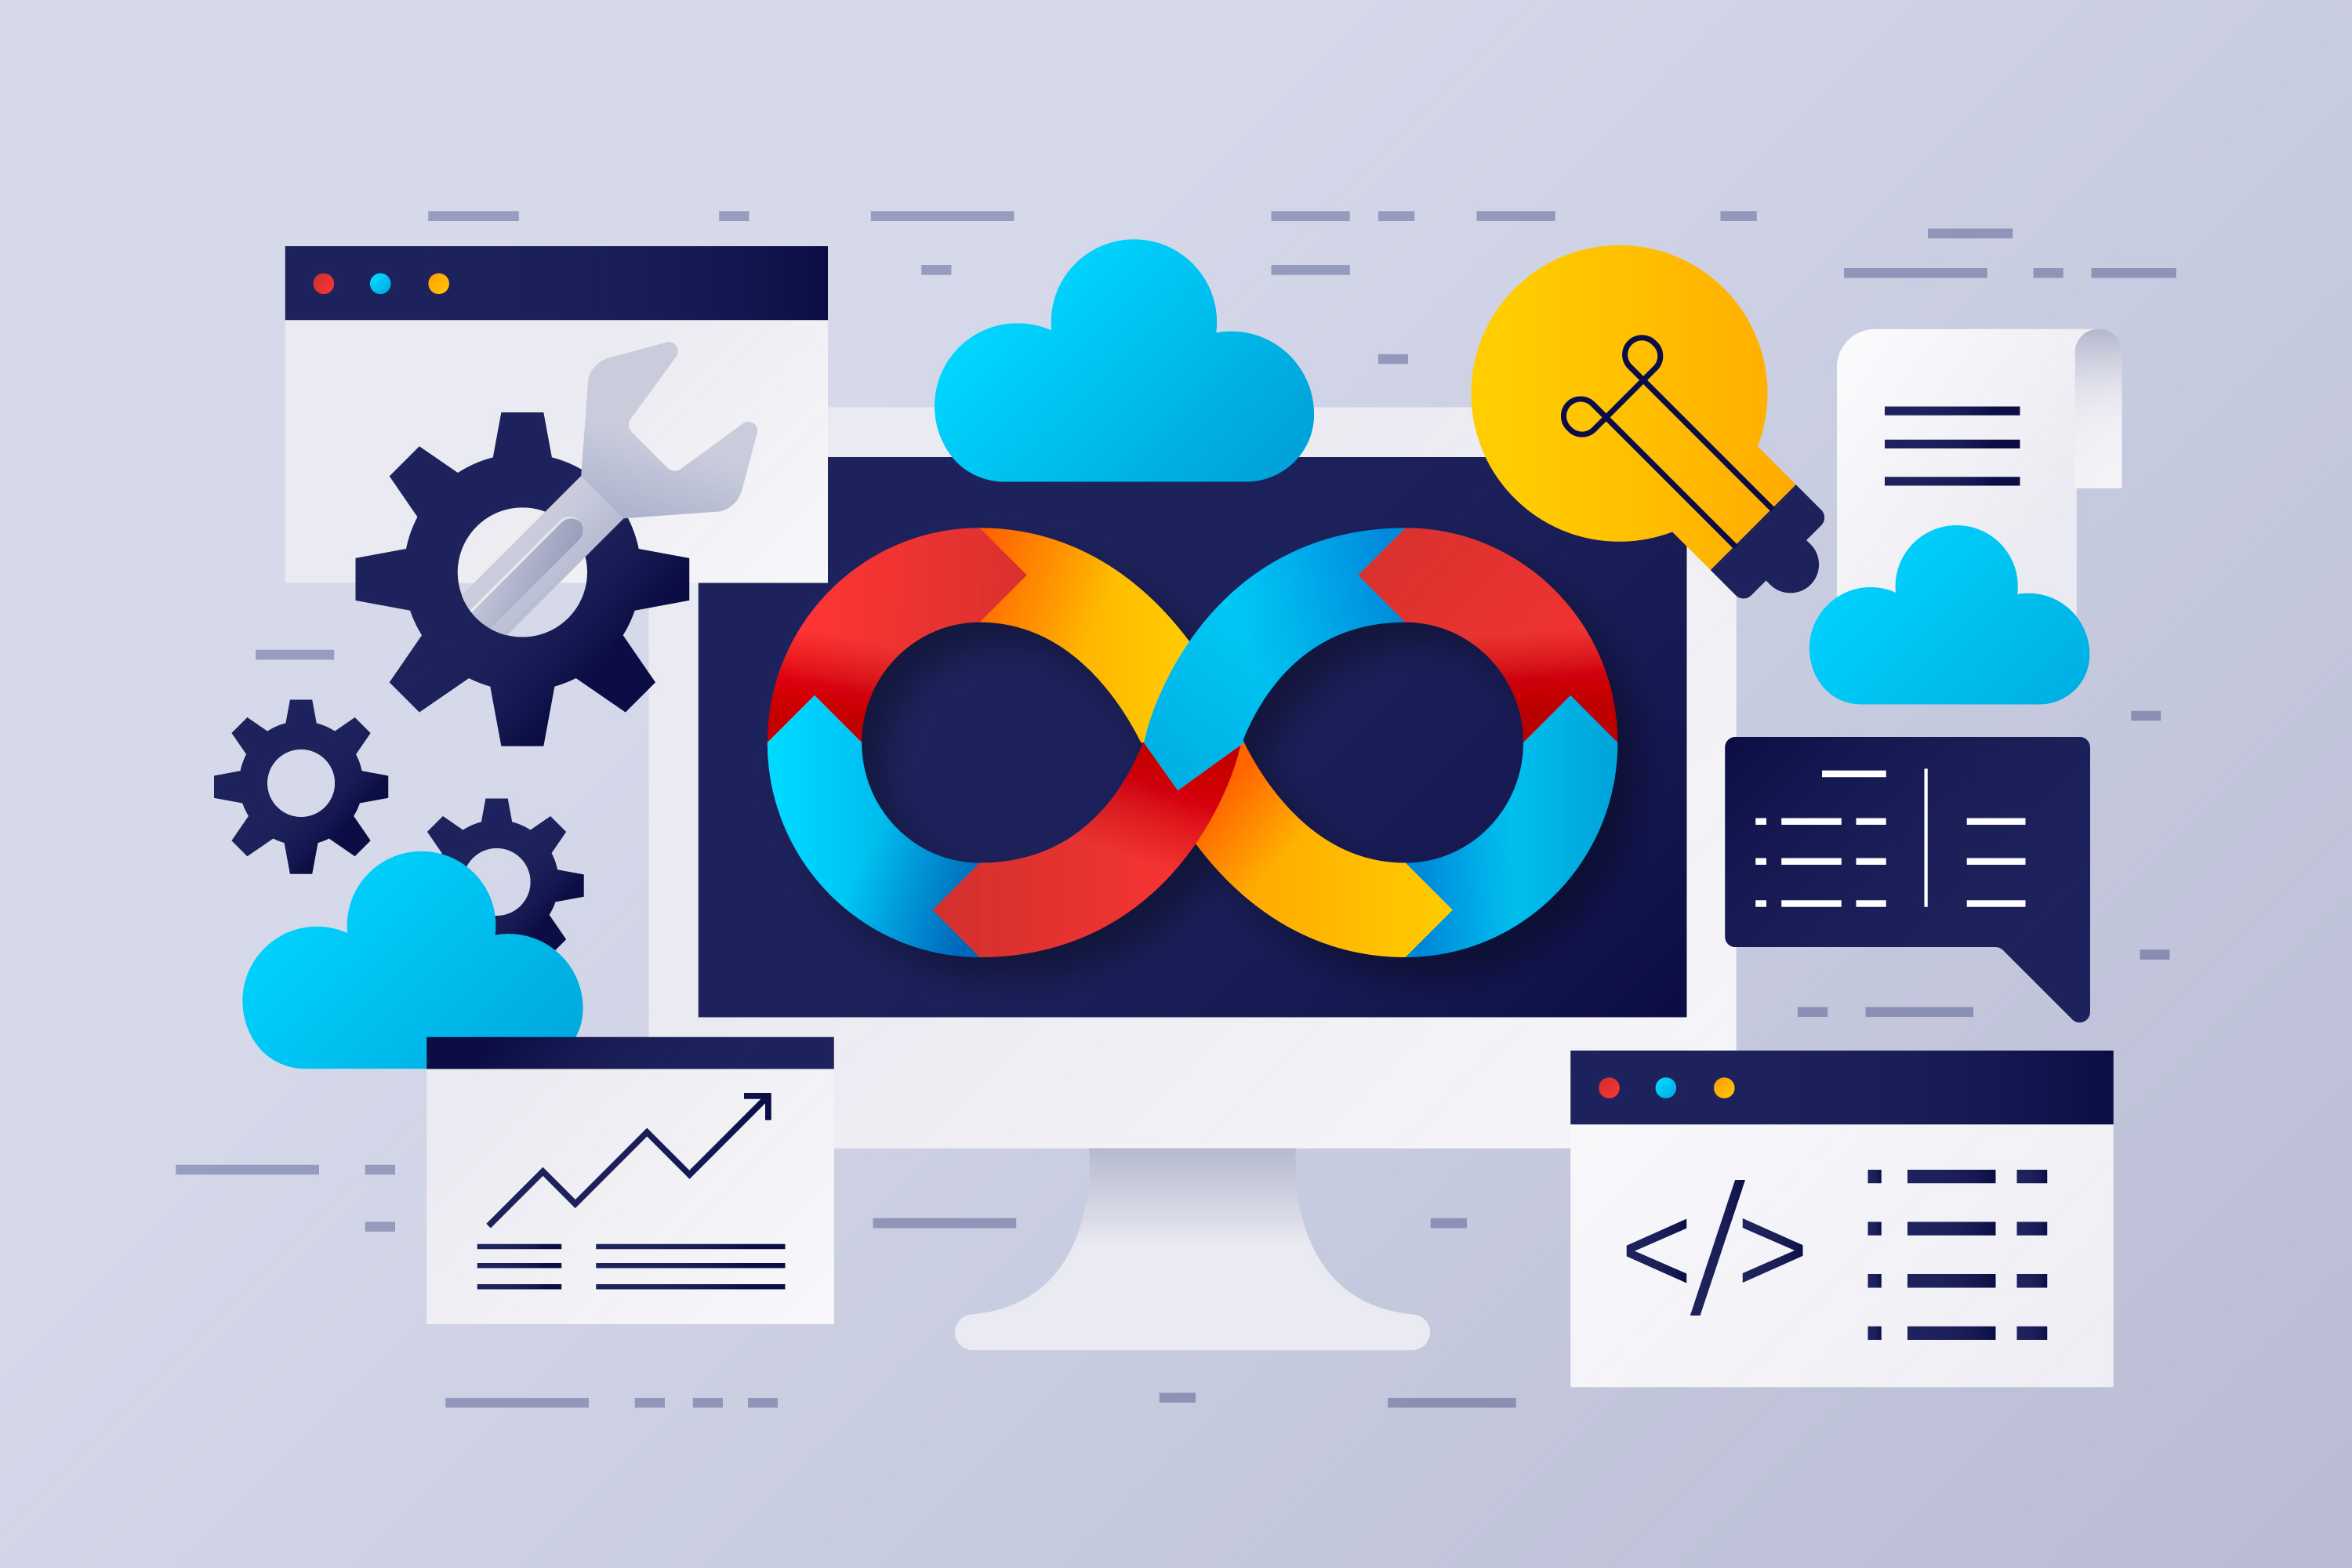 DevOps methodology as a bridge connecting and unifying various segments of the software deployment process.